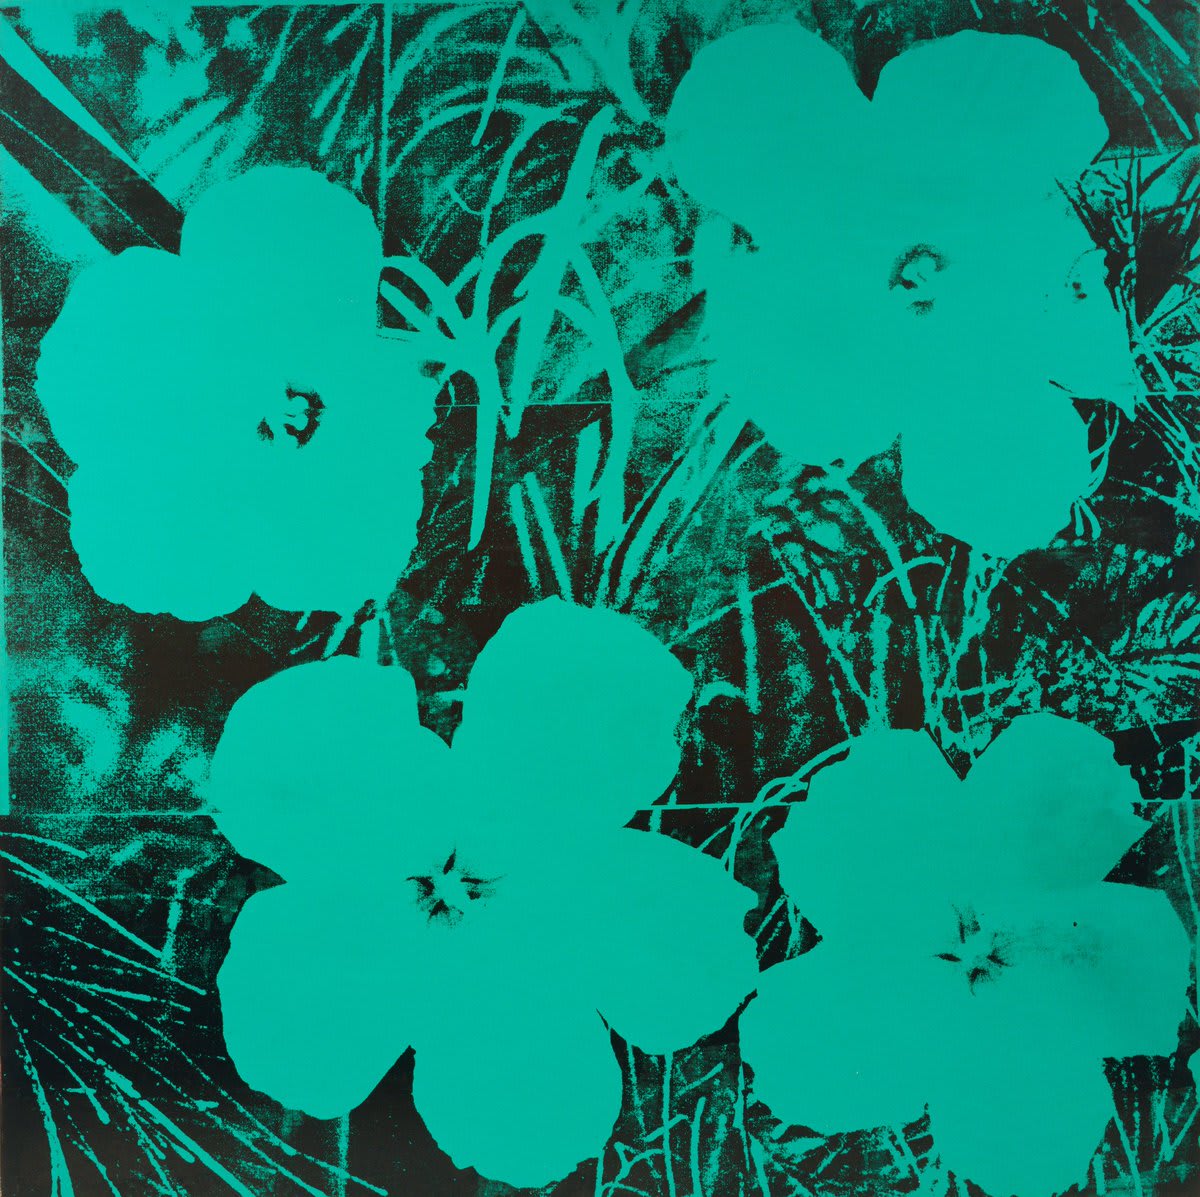 A nor'easter may be headed our way, but it feels like spring in the Museum lobby thanks to Andy Warhol’s “Ten-Foot Flowers” (1967). Happy #firstdayofspring!